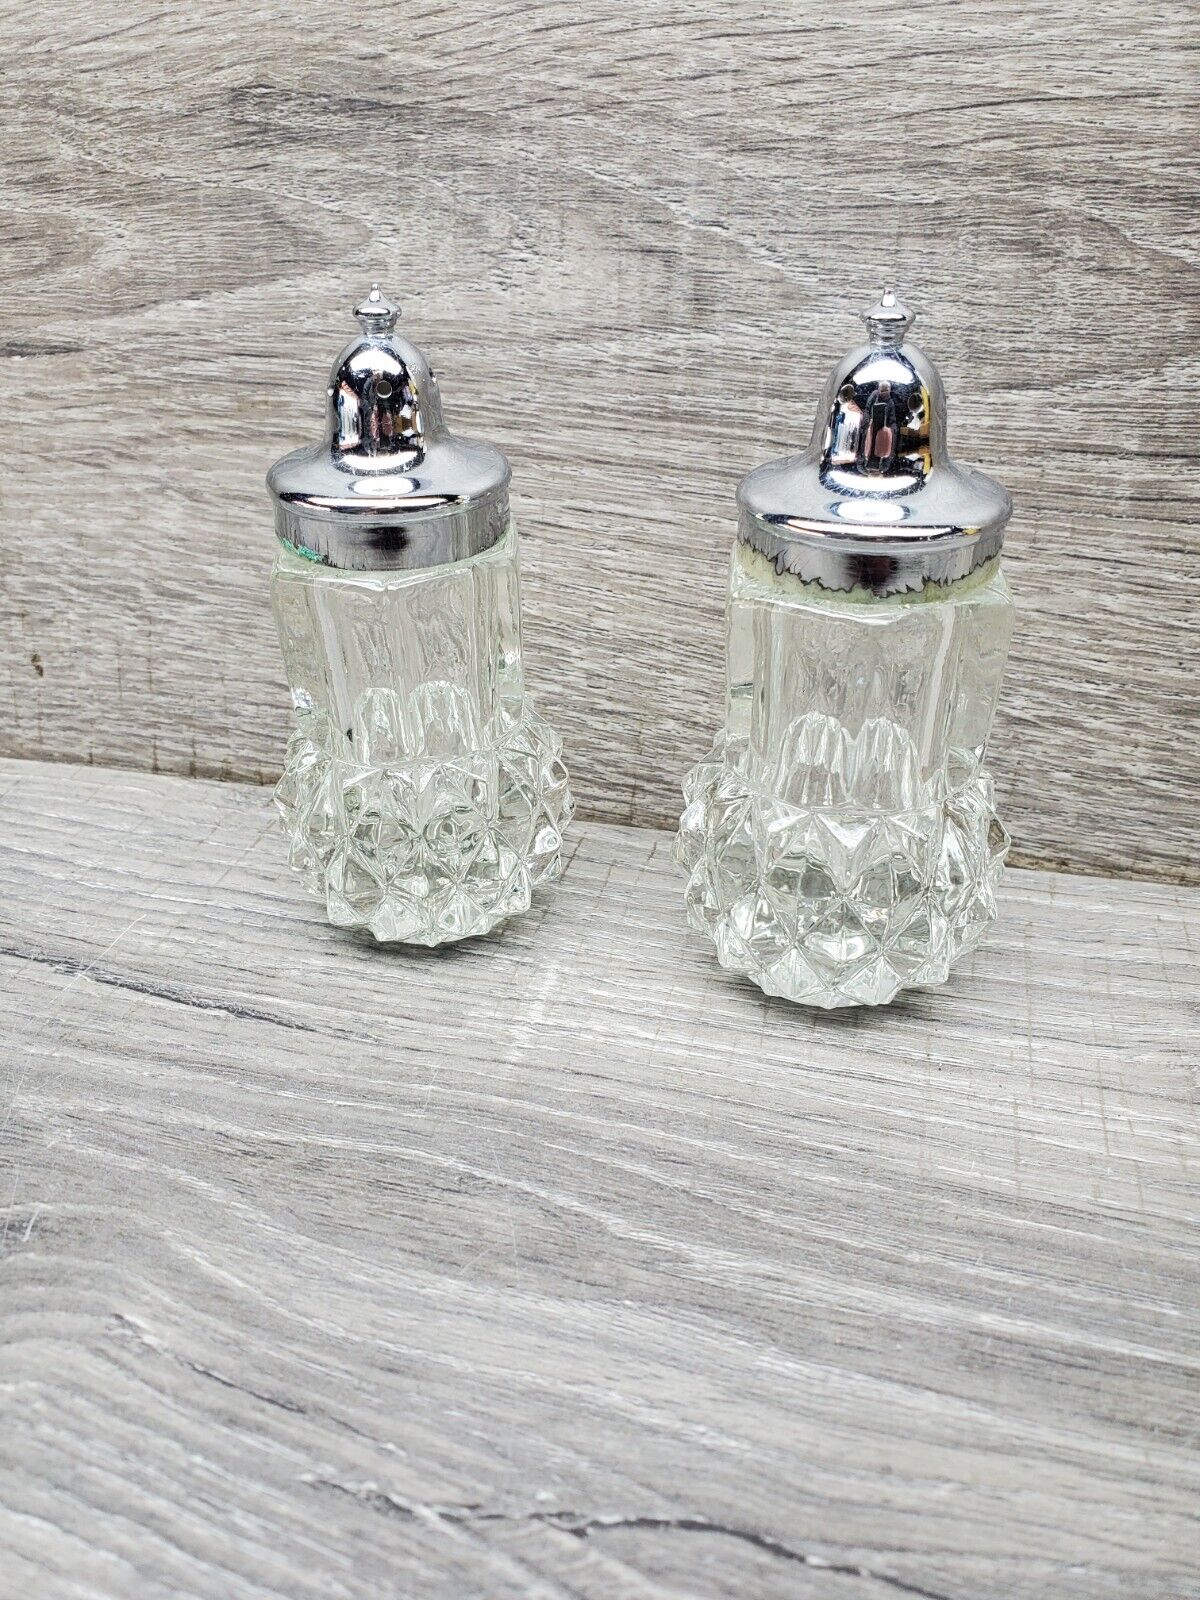 Vintage Indiana Glass Clear Salt and Pepper Shakers Diamond Cut Tiara Set.